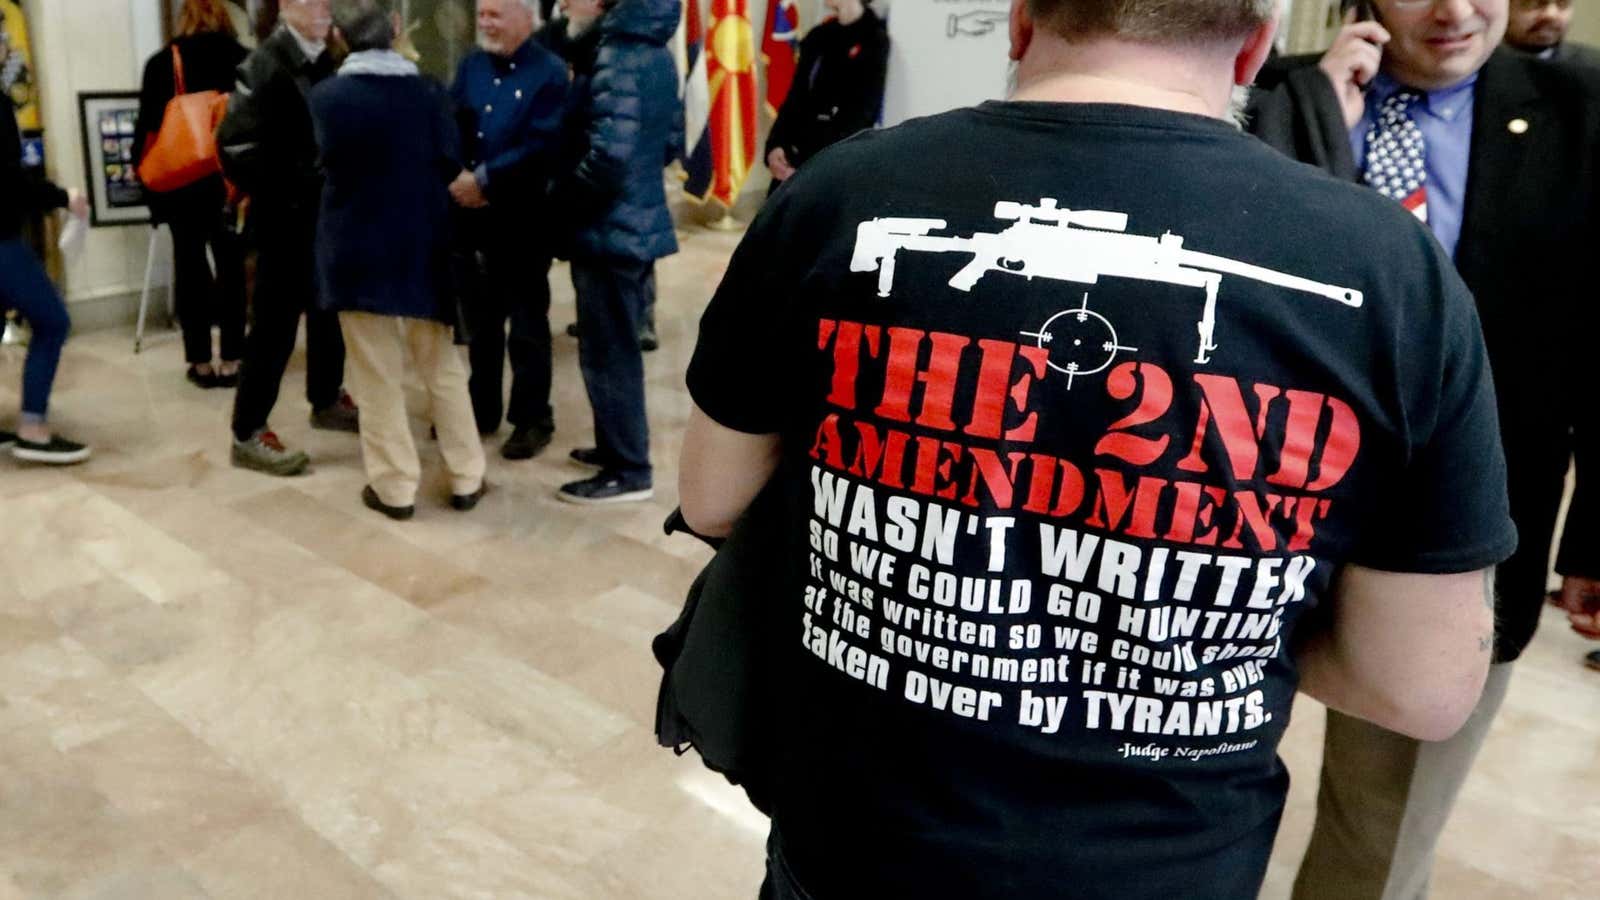 Whoops! You just wanted to buy a t-shirt, but you ended up spreading far-right radicalization.